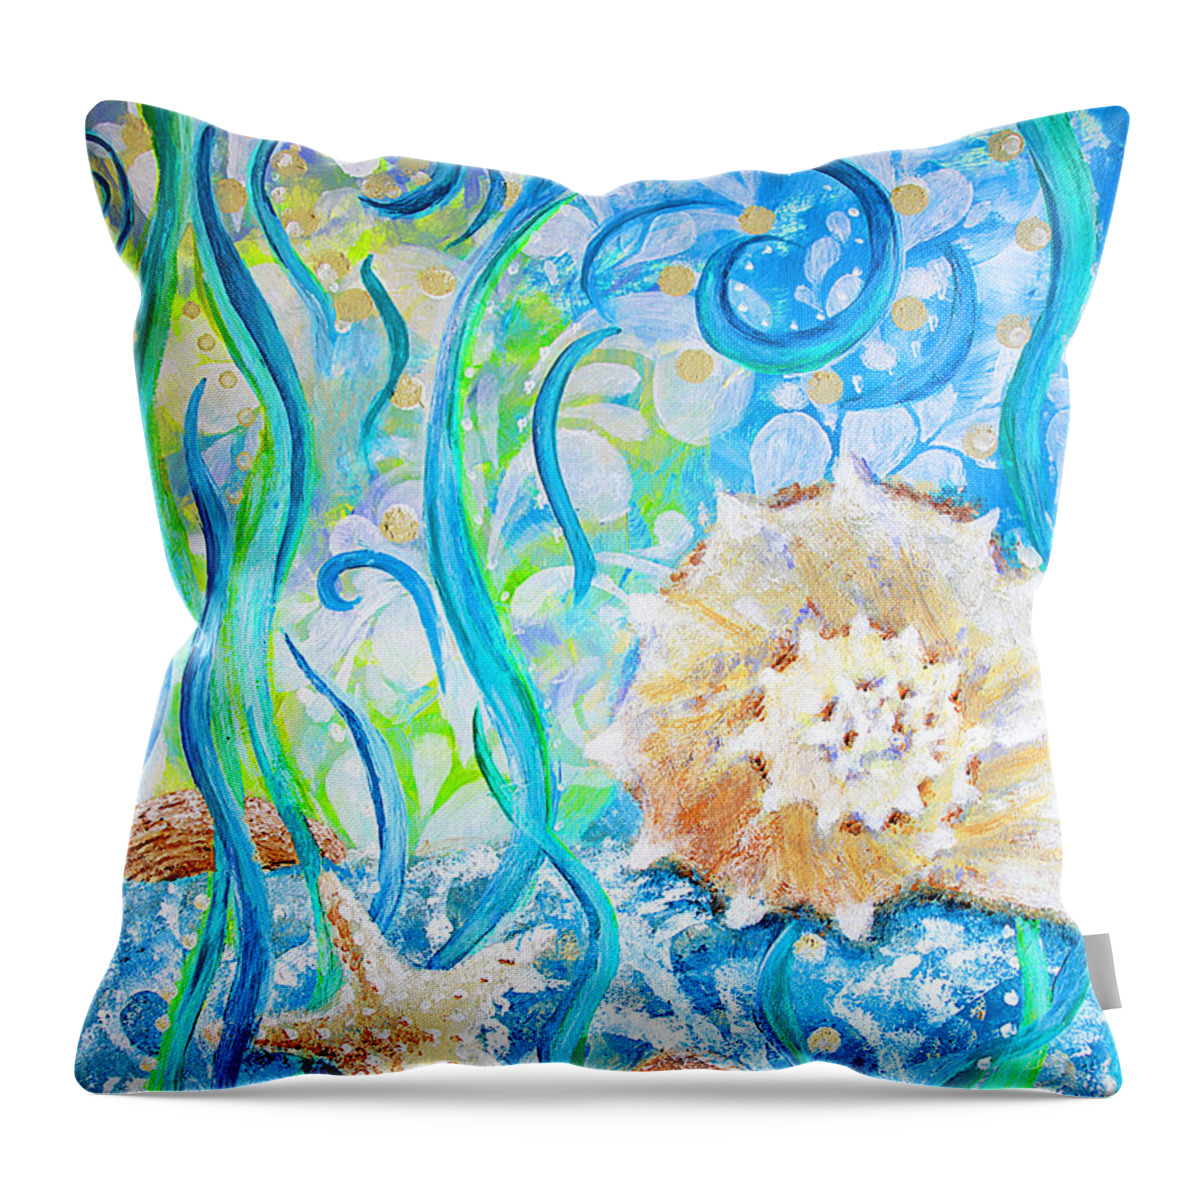 Seashells Throw Pillow featuring the painting Seashells by Jan Marvin by Jan Marvin